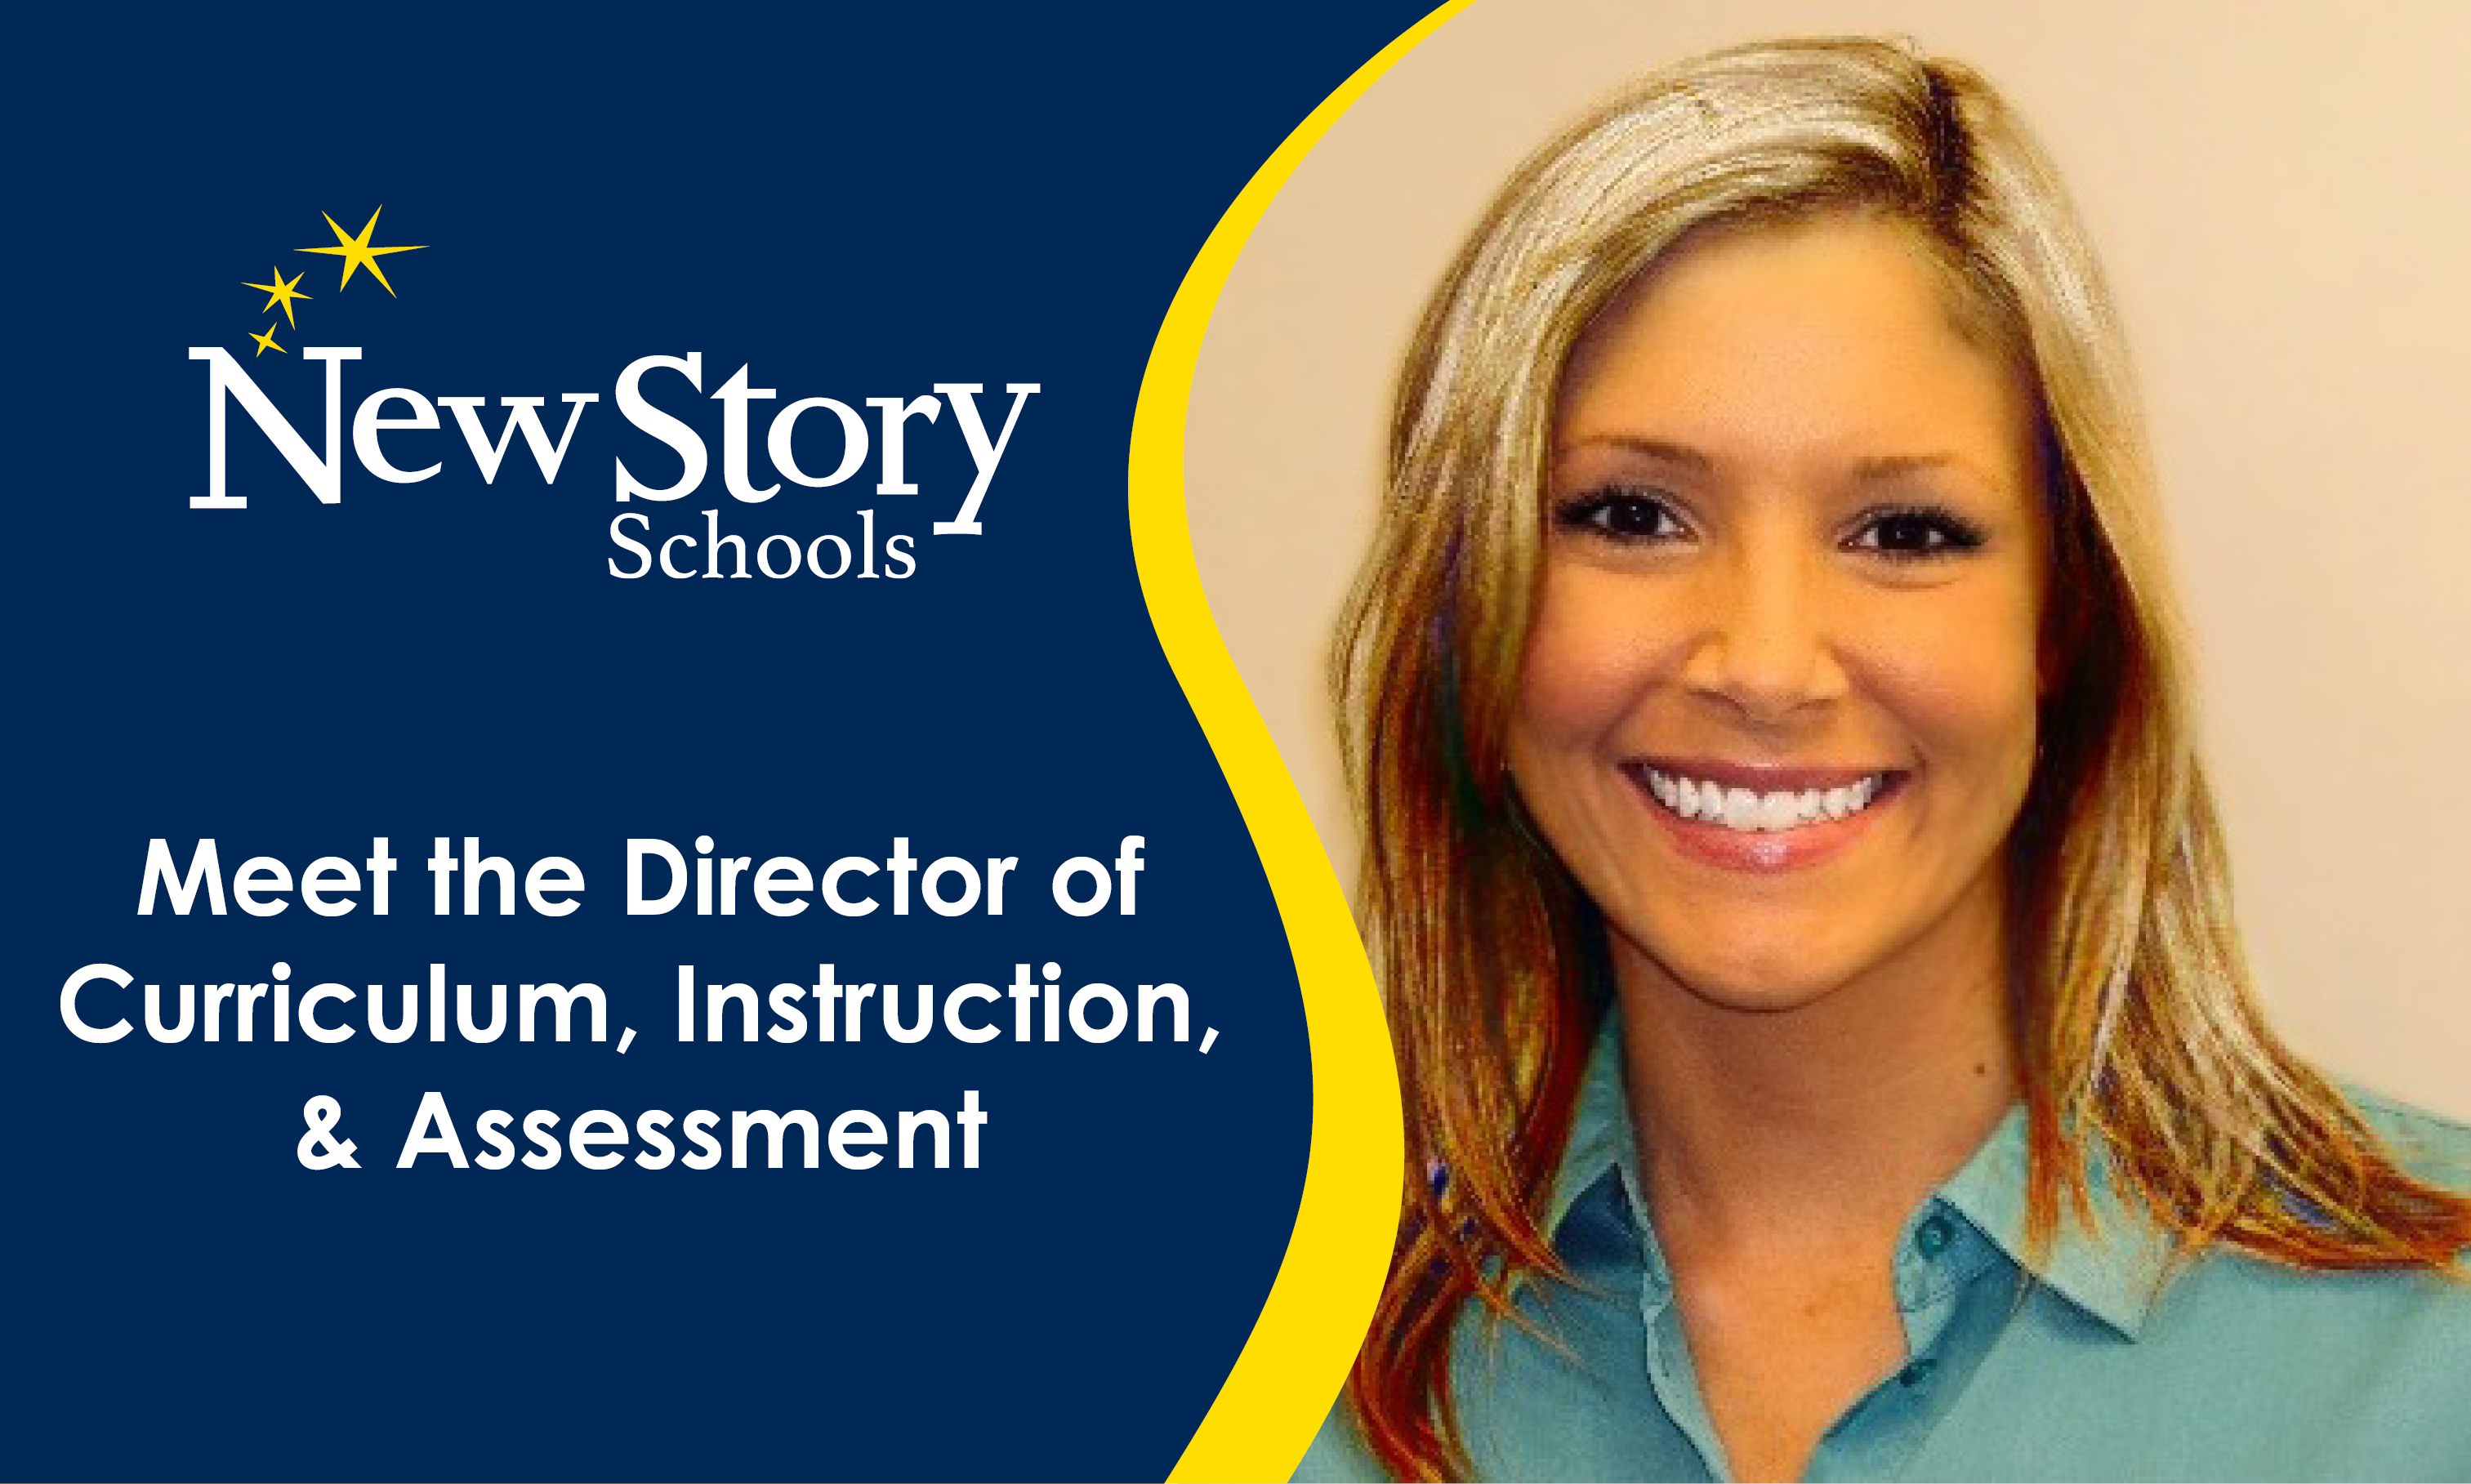 Meet the Director of Curriculum, Instruction, and Assessment